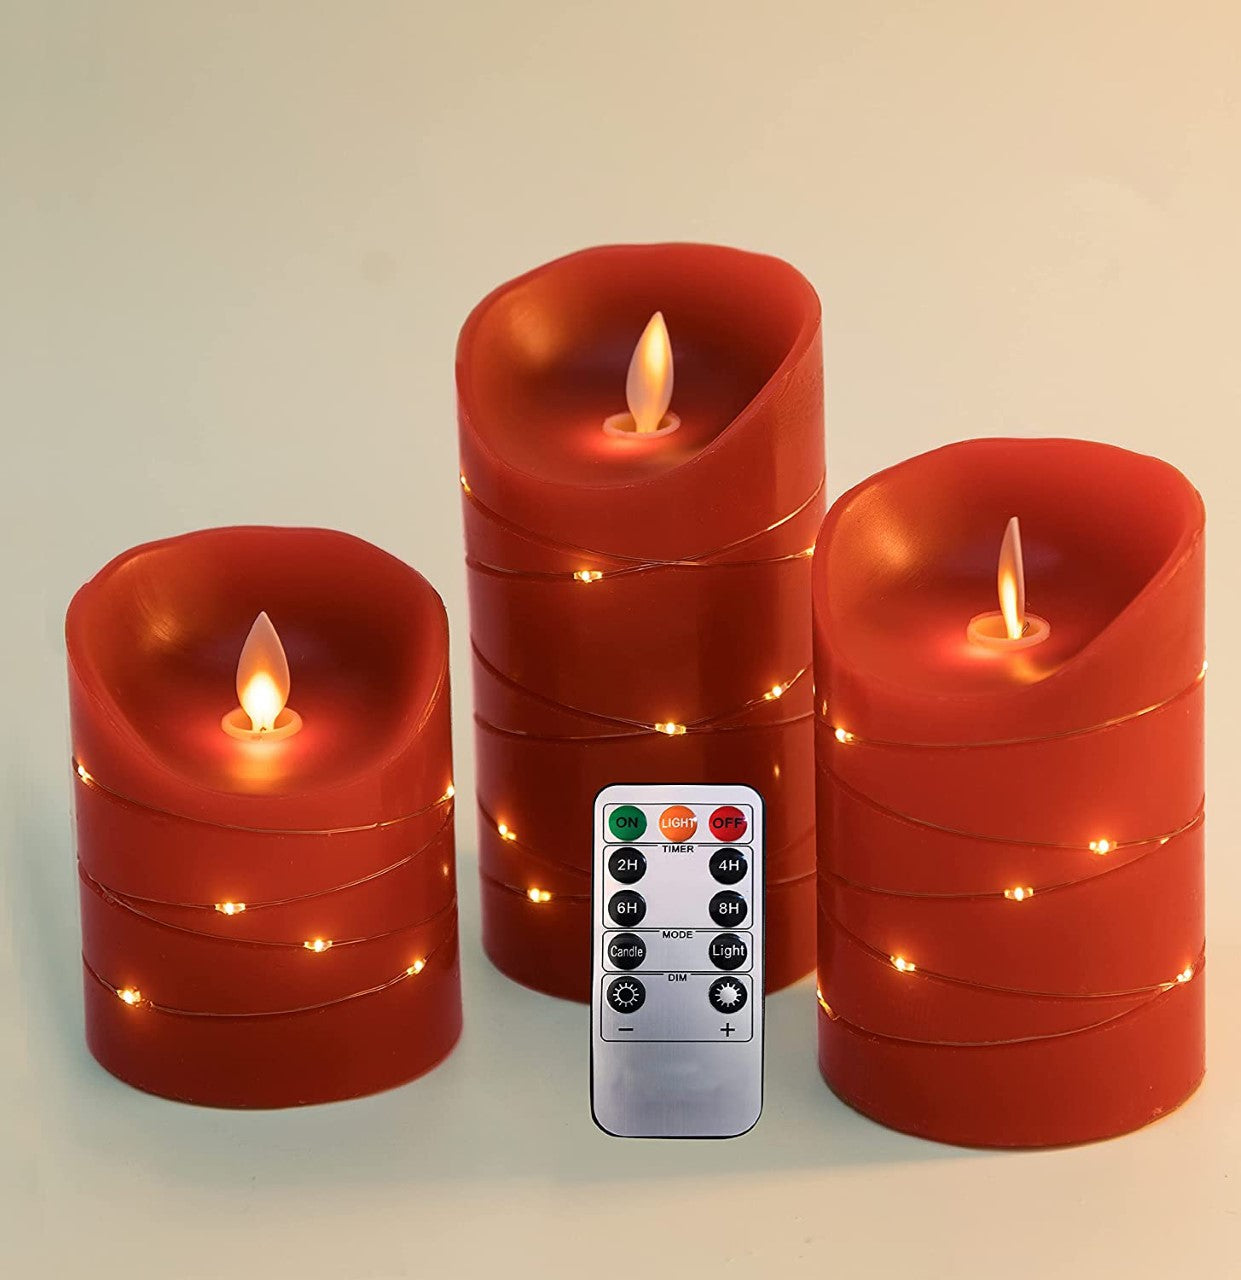 Red LED flameless Candle with Embedded Starlight String, 3 LED Candles, 10-Key Remote Control, Real Wax, Battery Powered.